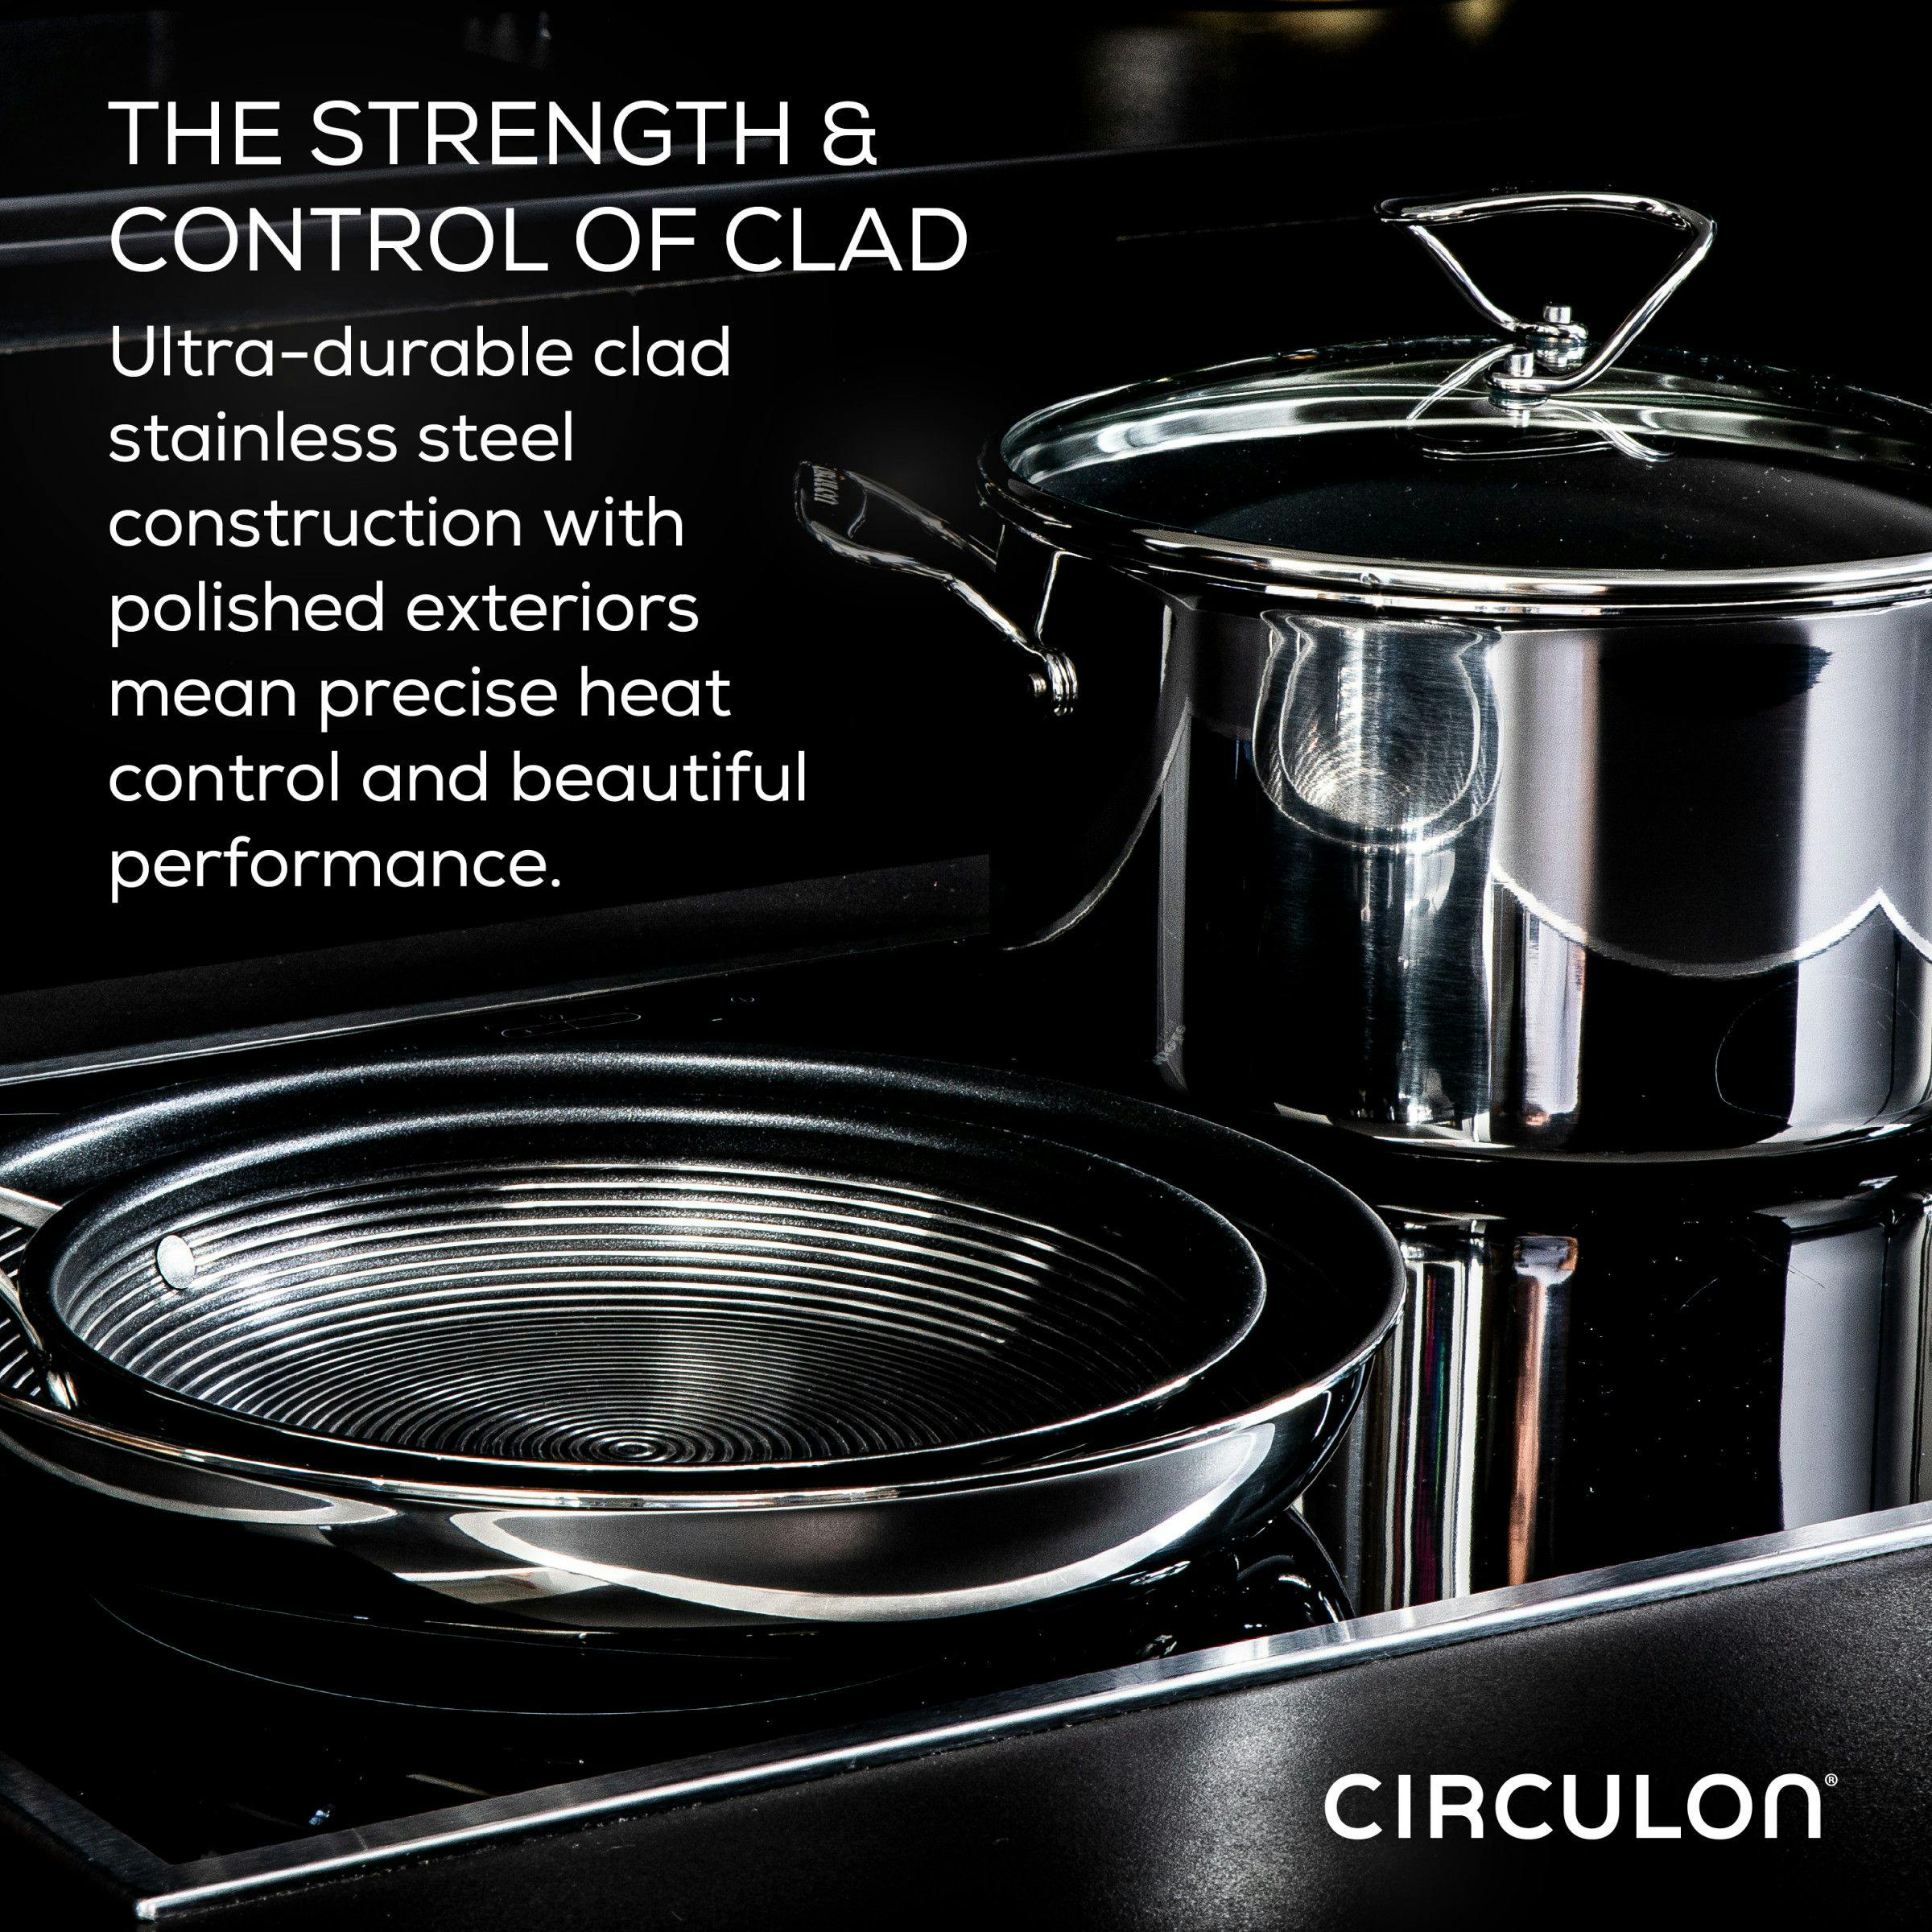 Circulon Clad Stainless Steel Induction Frying Pan with Hybrid SteelShield and Nonstick Technology, 12.5-Inch, Silver